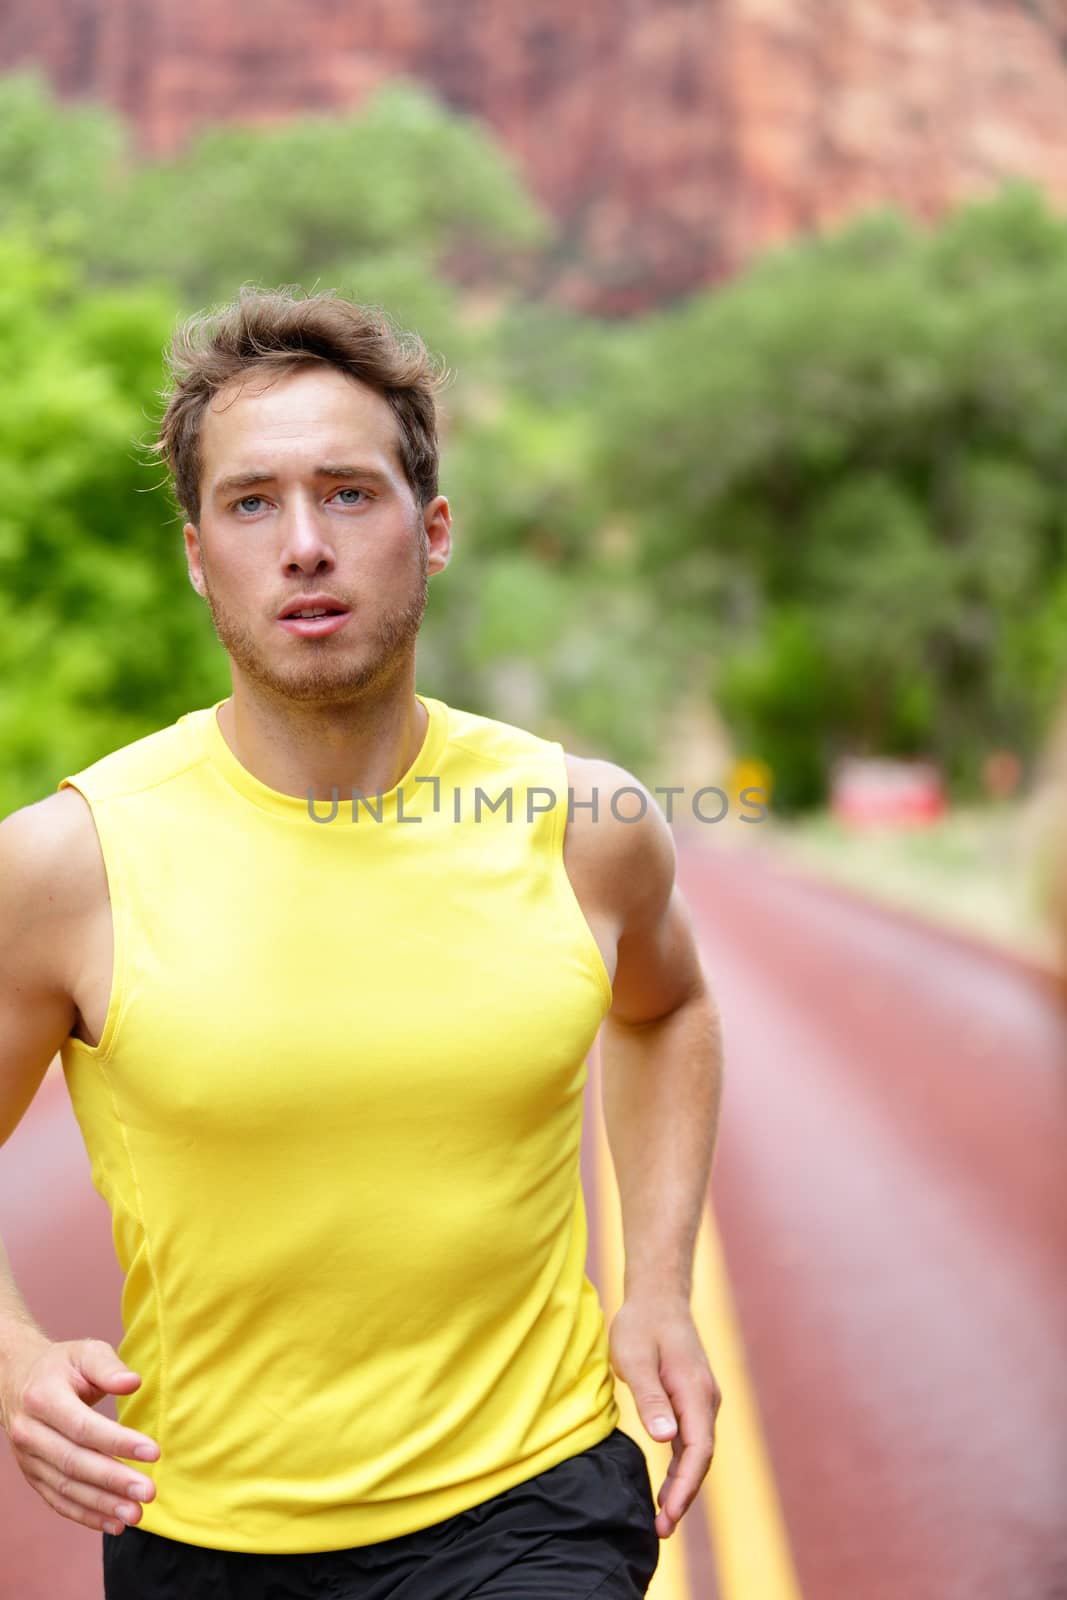 Fitness sport runner man running determined and focused with concentration training for success and health. Male athlete in sprint run in workout for marathon.